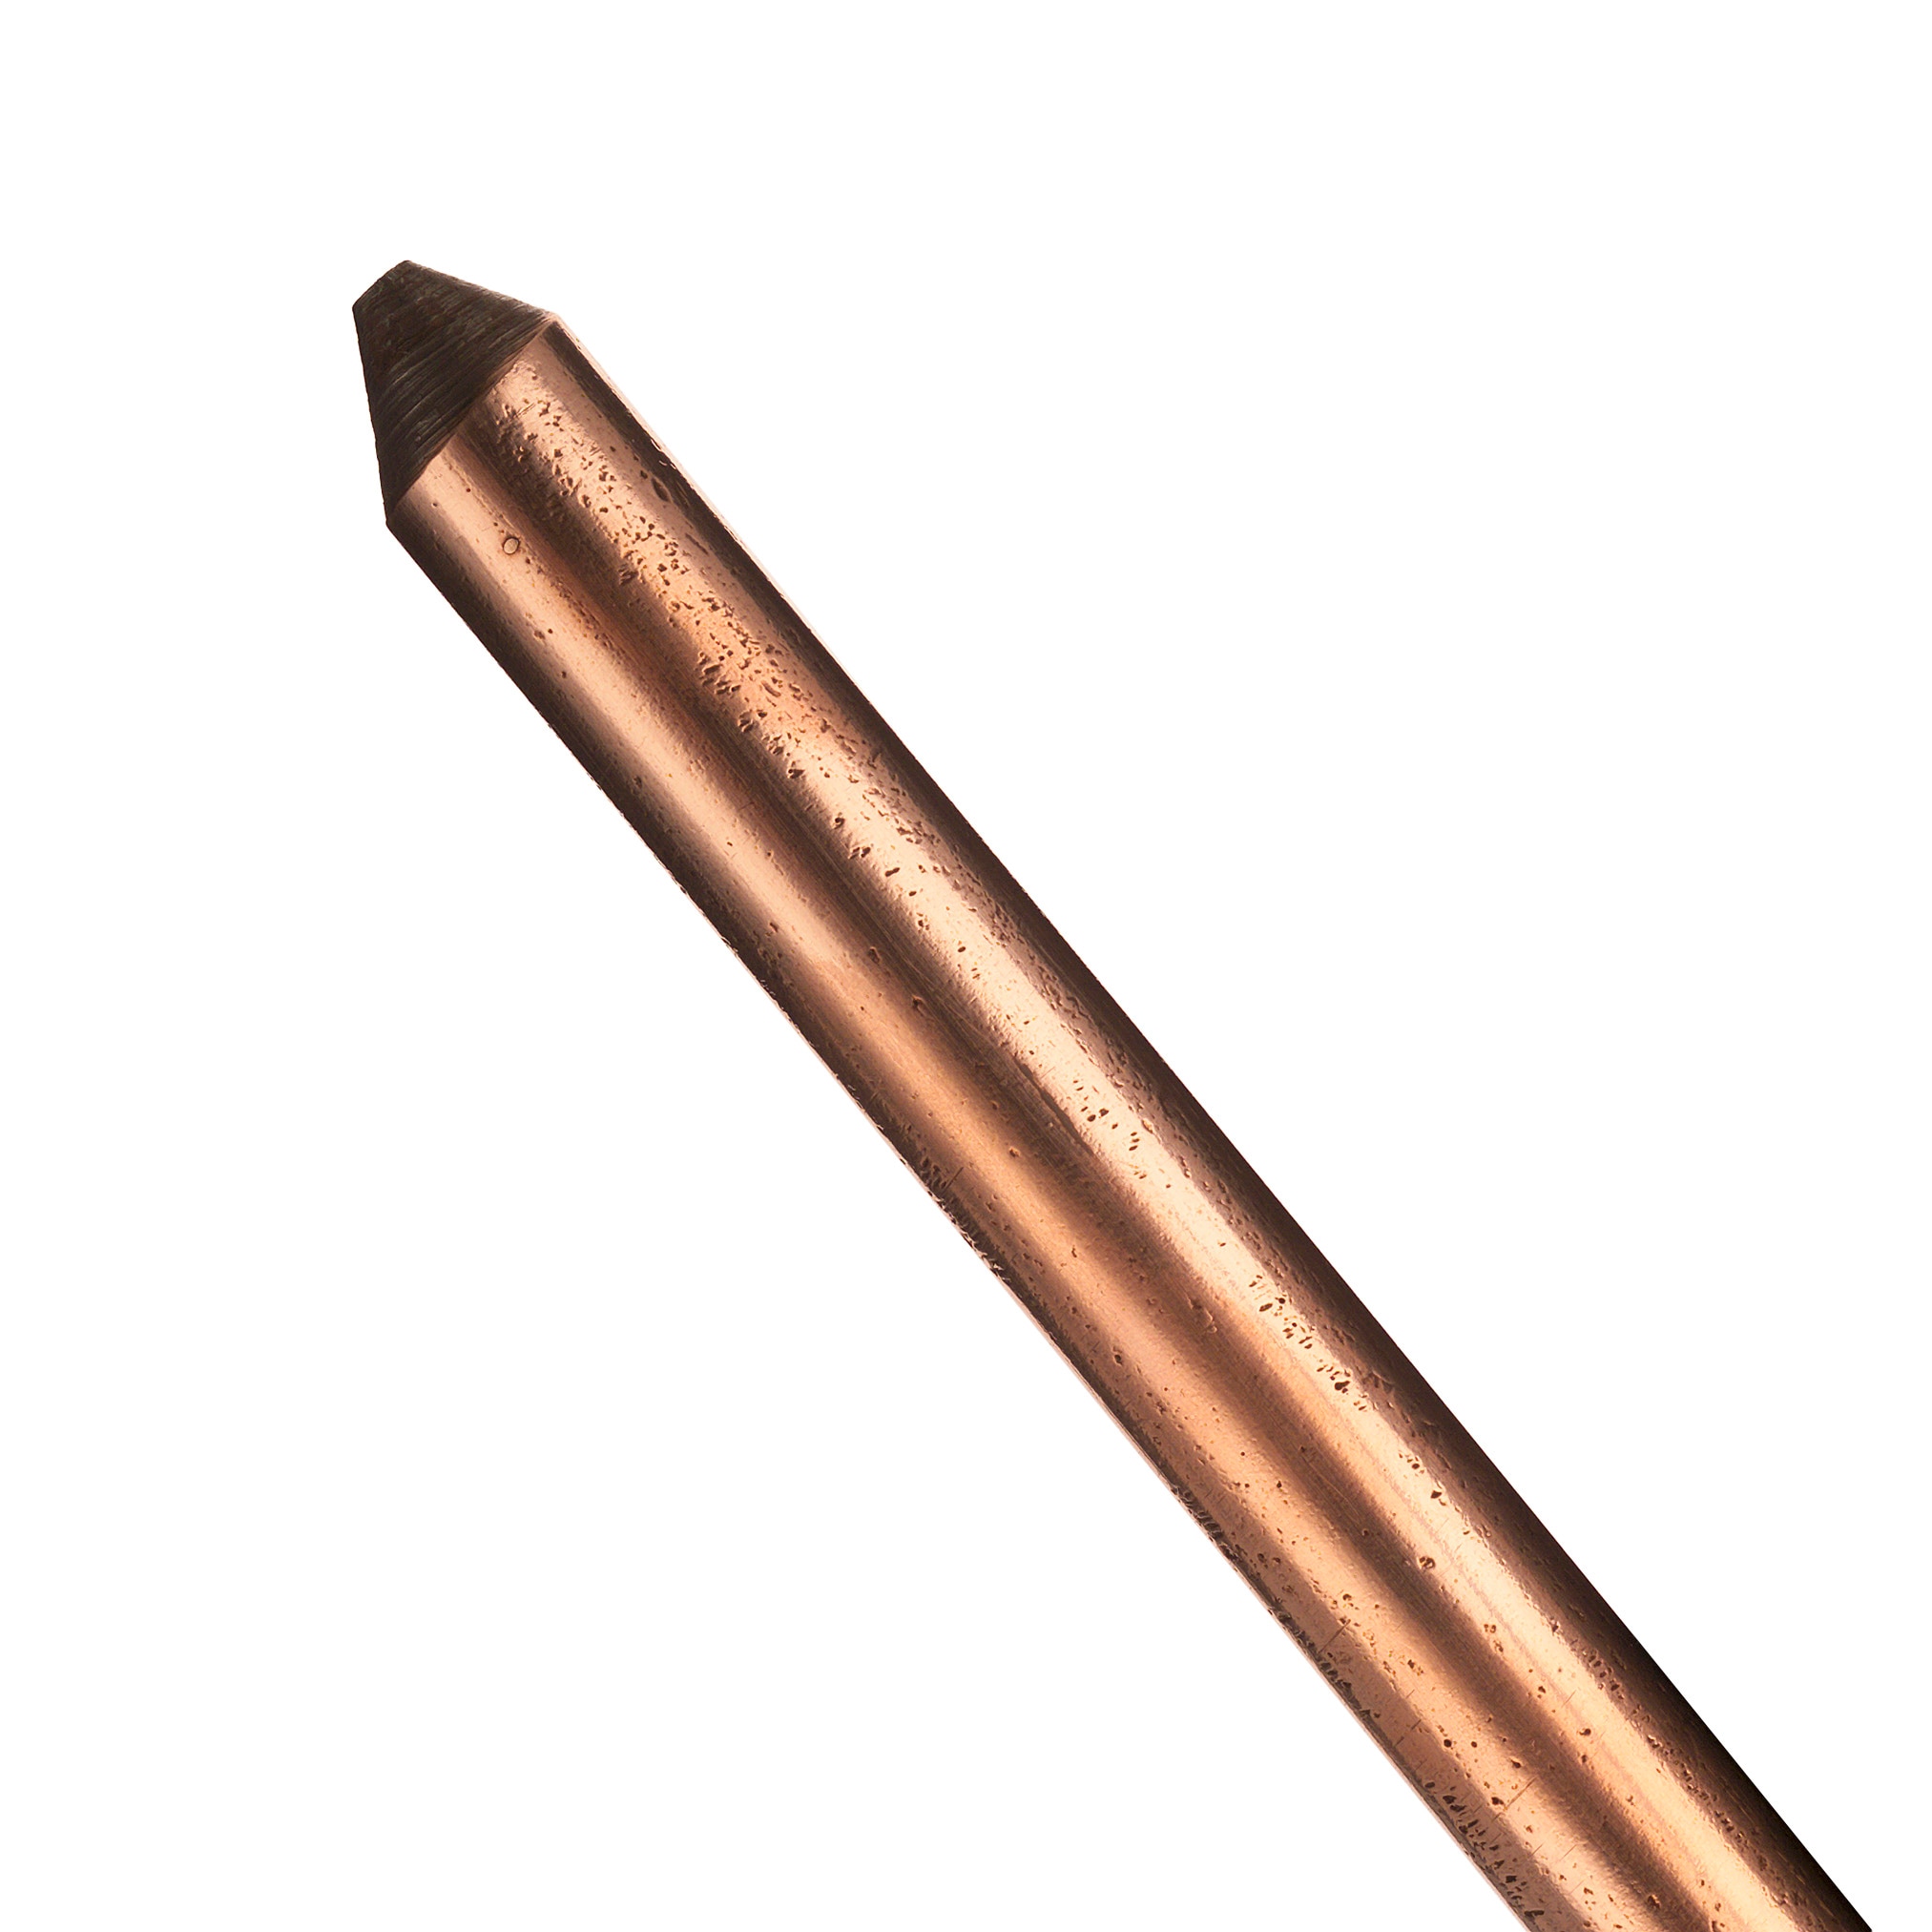 Galvan Copper Grounding Rods, 96-inch Length, UL Listed, Meets National  Electric Code Requirements in the Grounding Bars department at